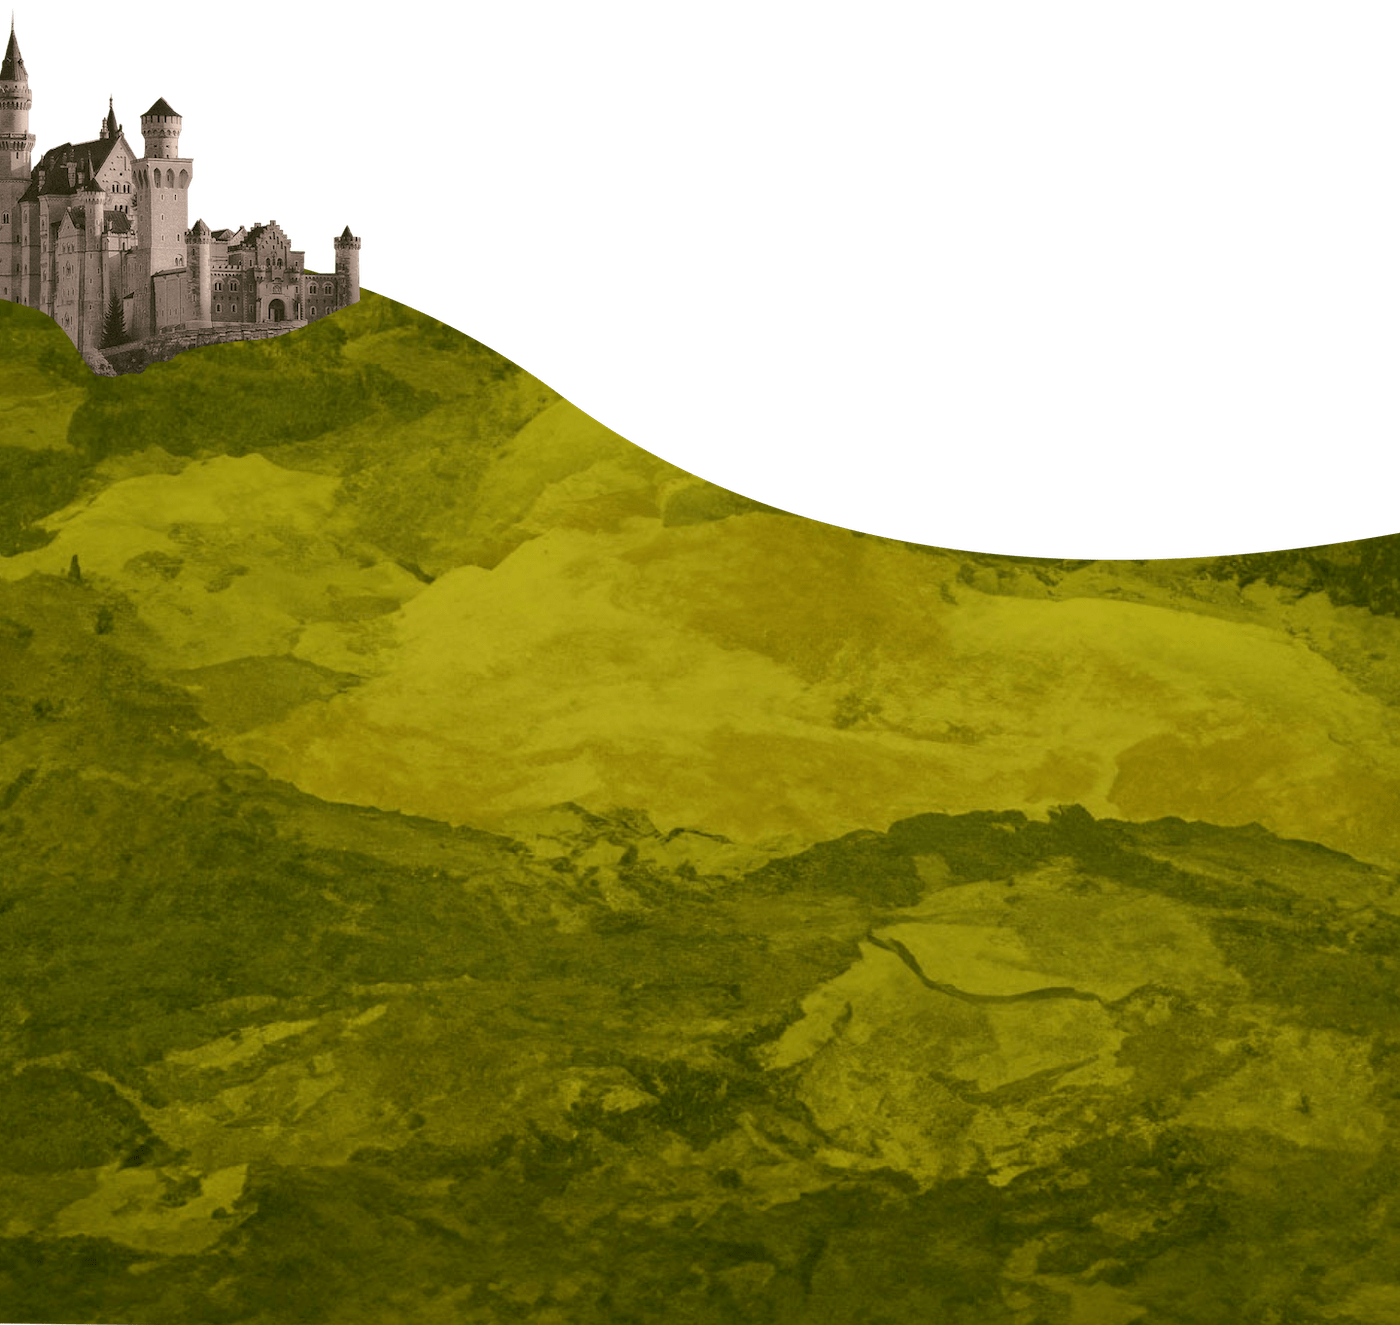 a hill with a castle on it